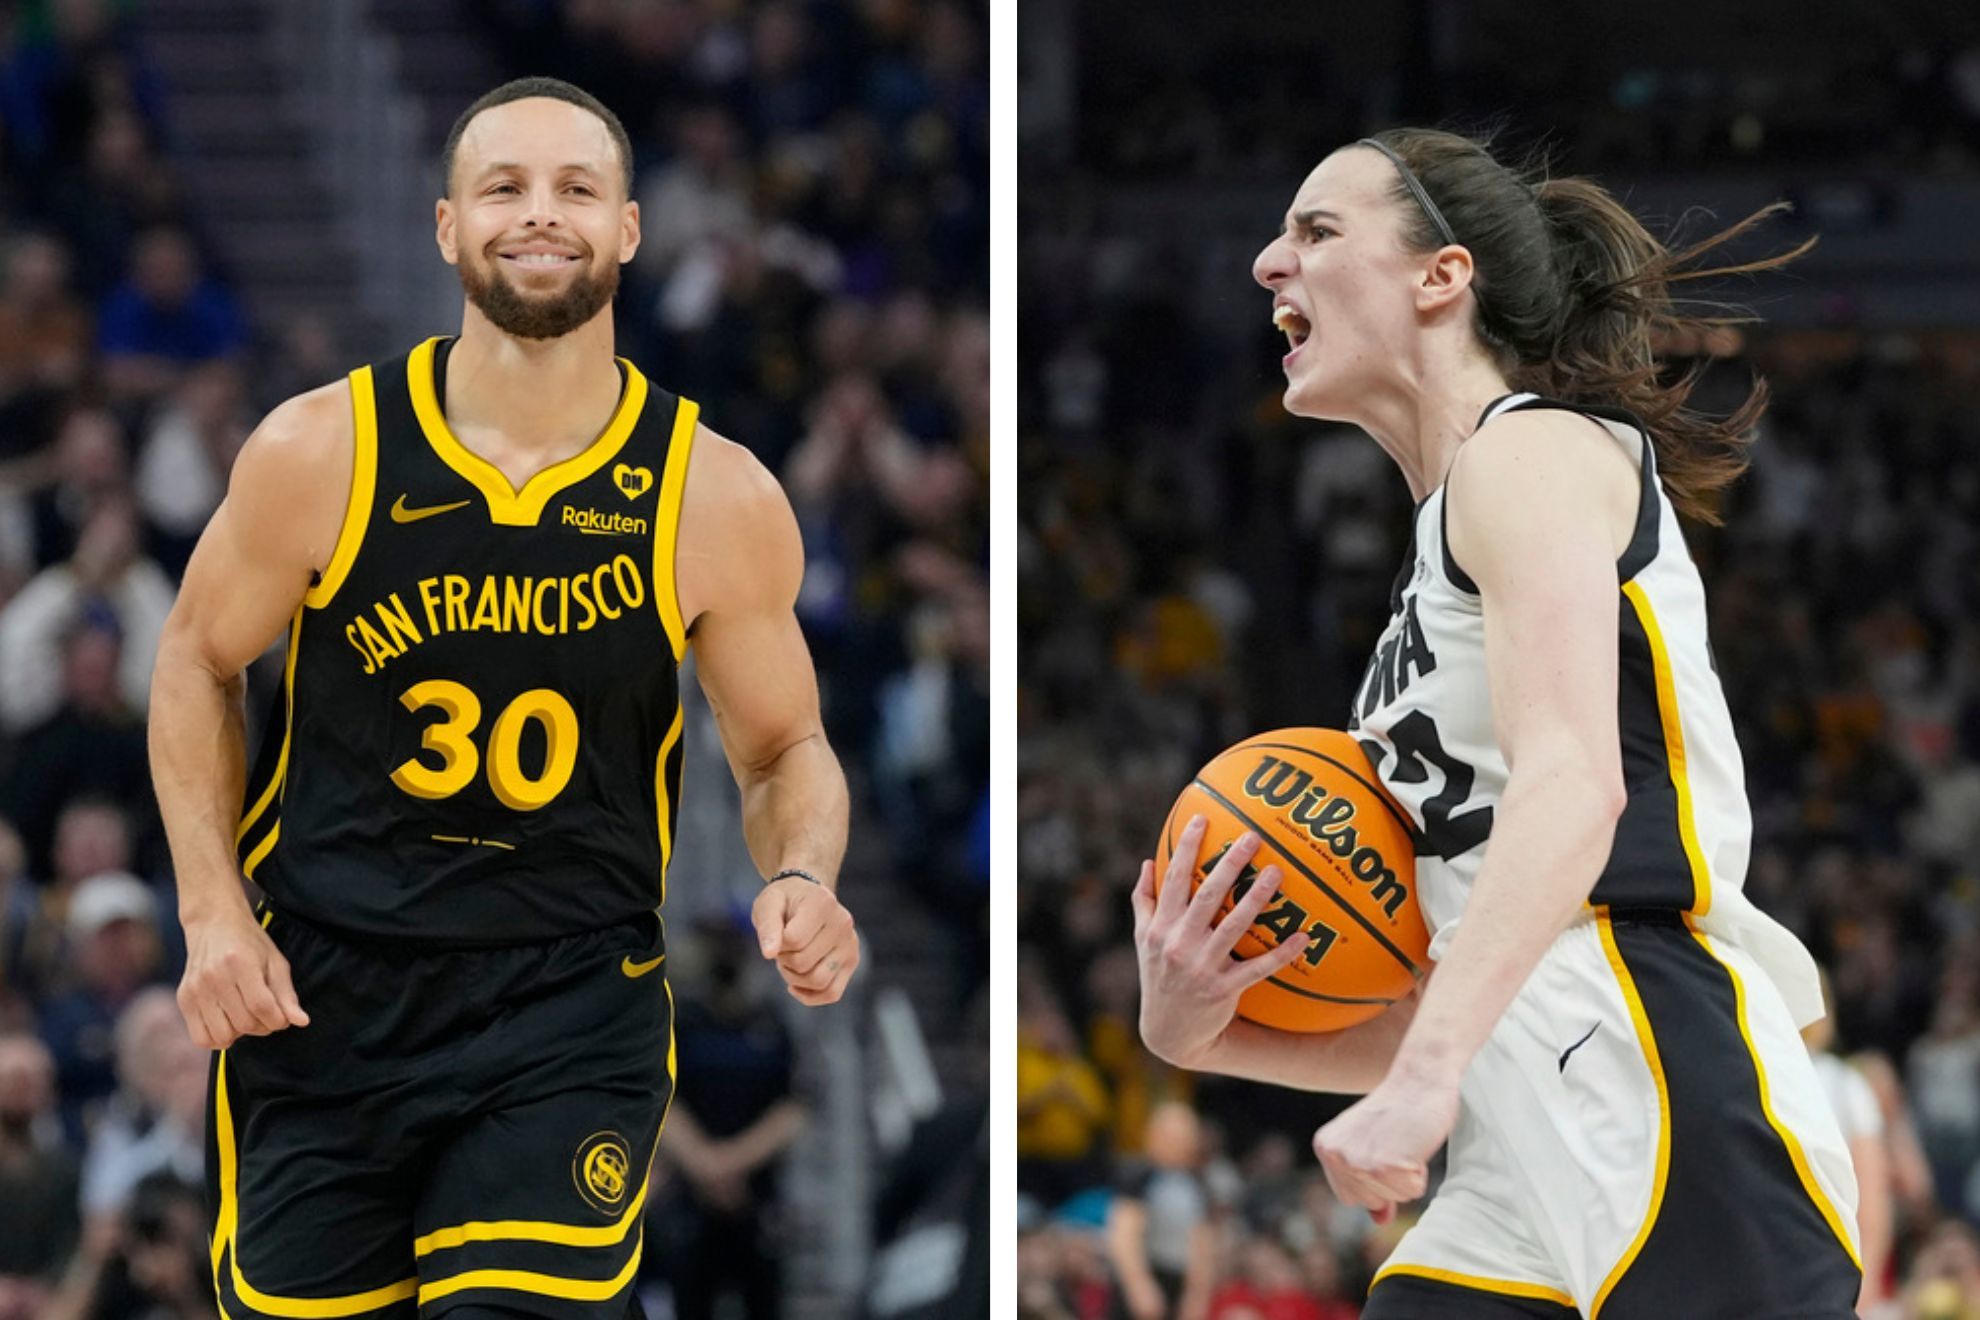 Caitlin Clark has become a superstar at Iowa